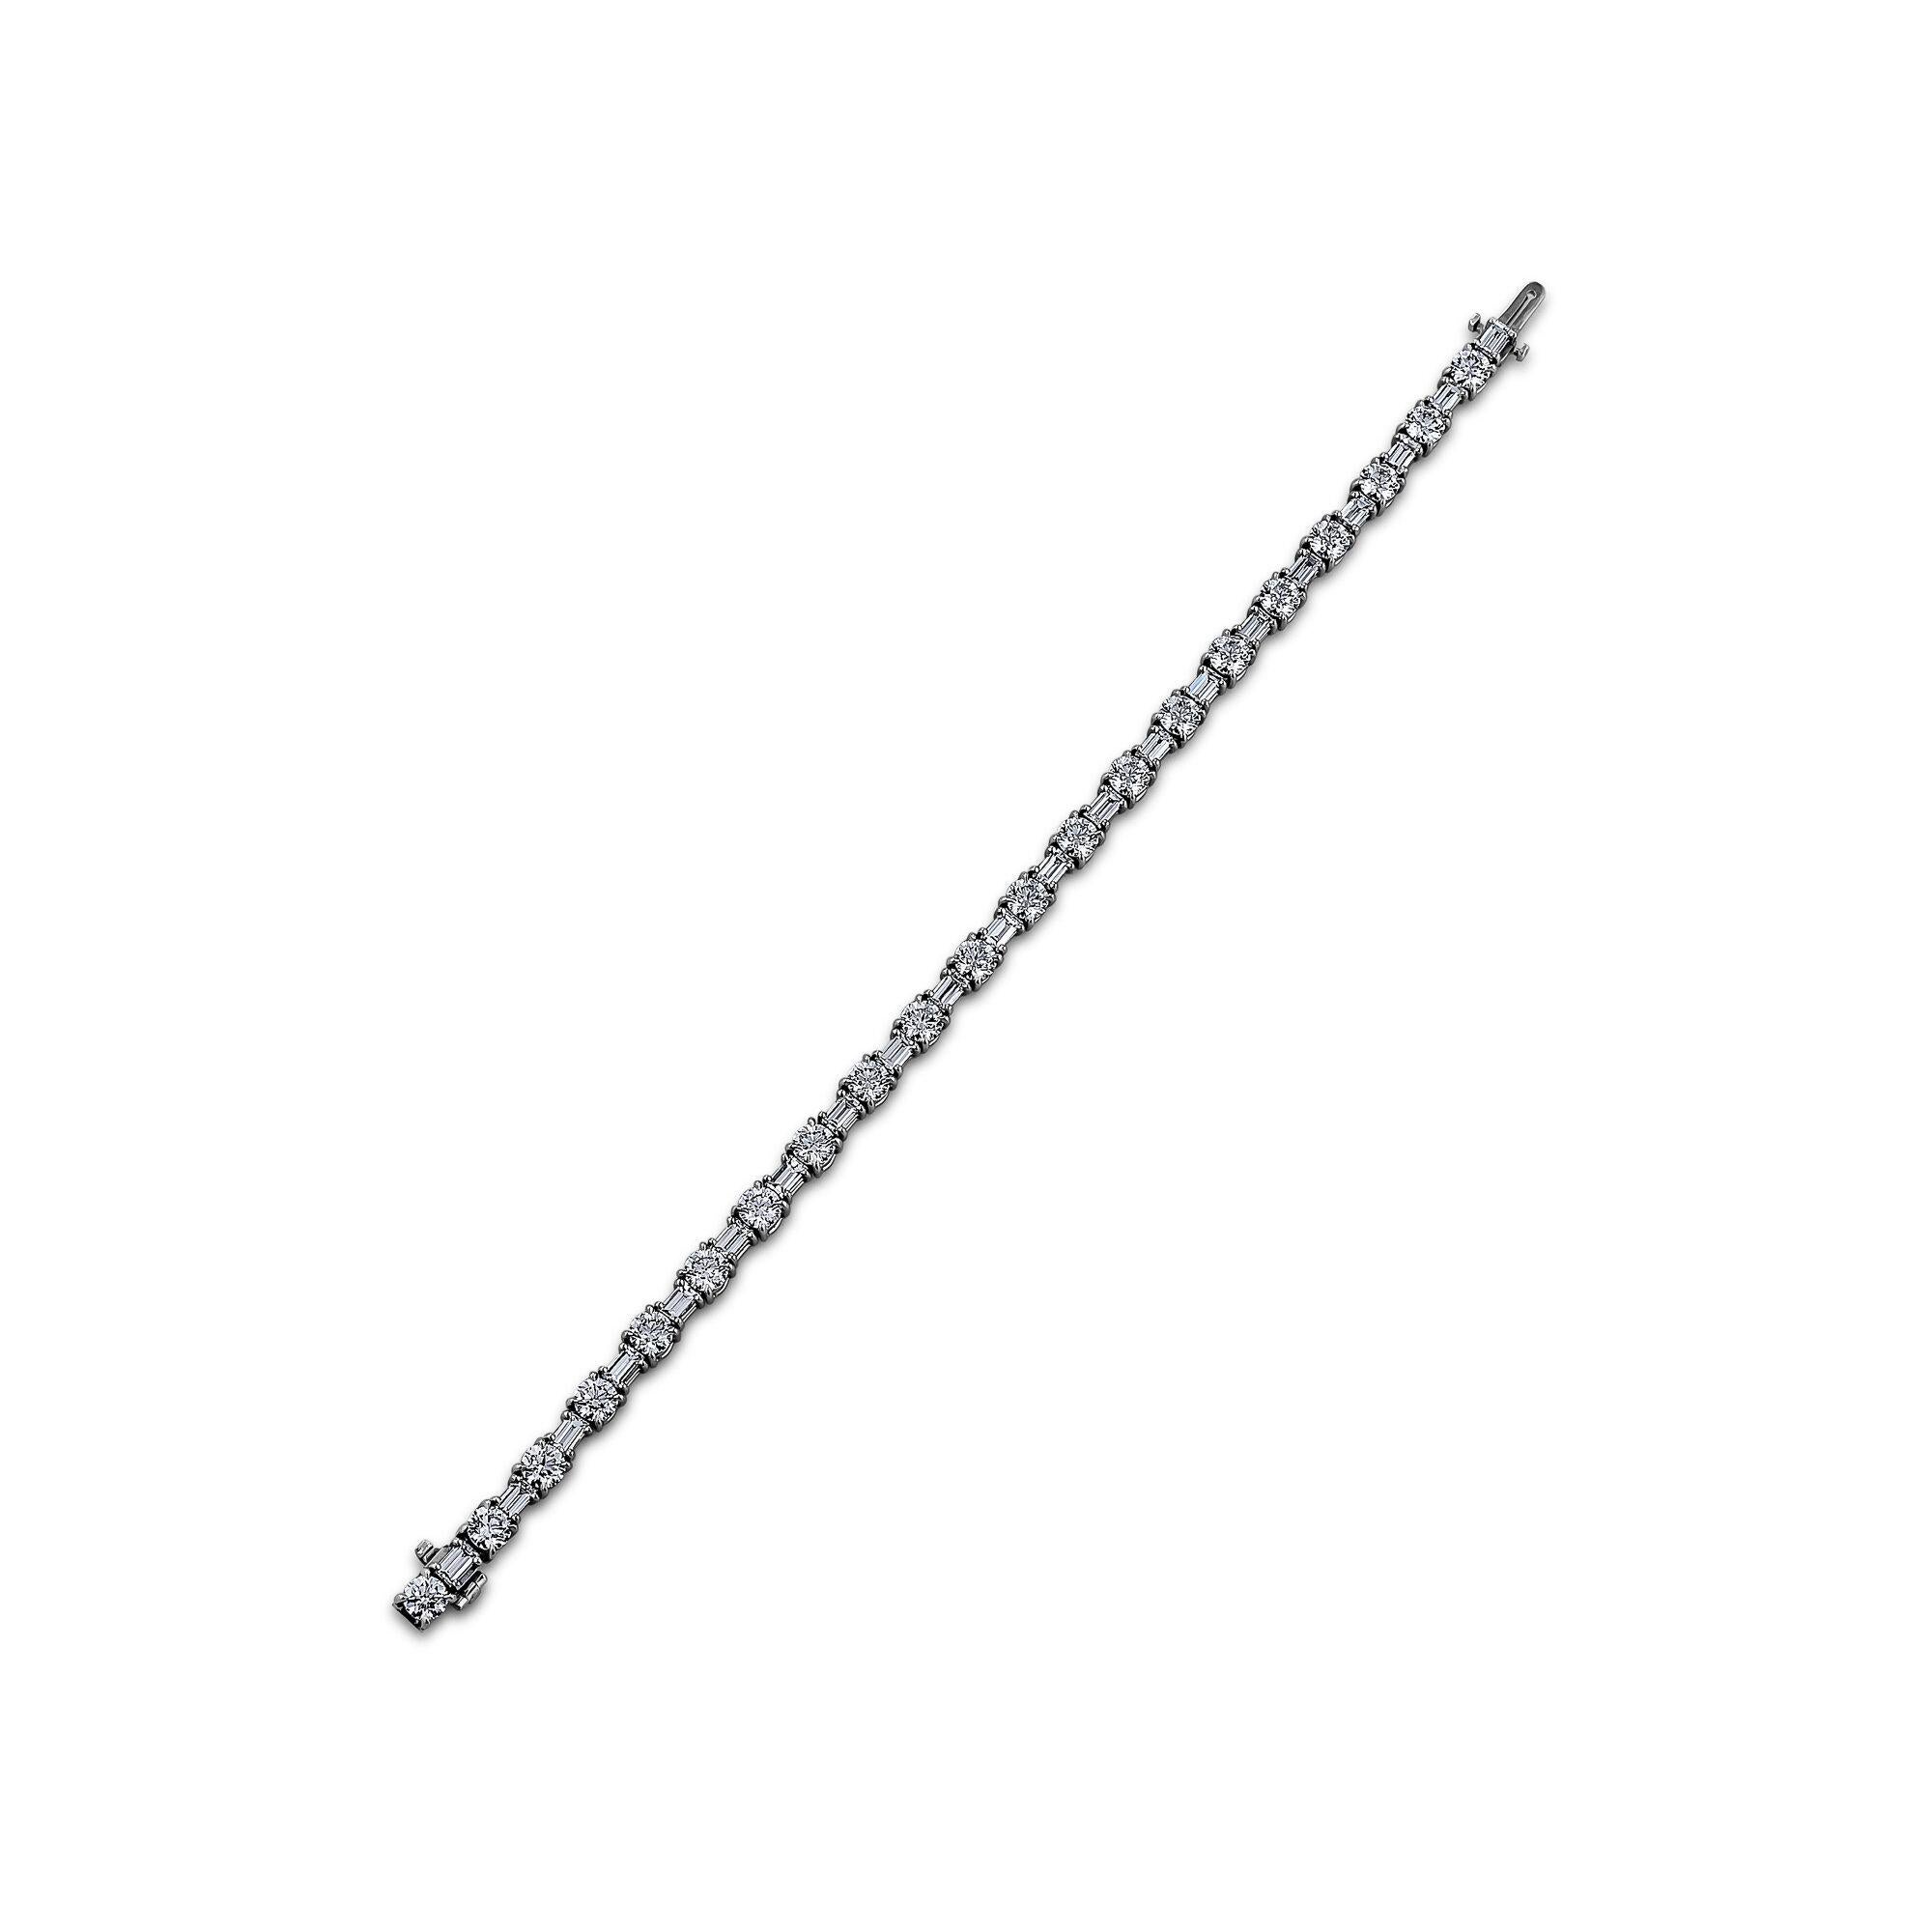 With a total of 7.32 carats of alternating baguette and round brilliant ideal cut diamonds, this elegant bracelet is the perfect line up. Handmade by Steven Fox Jewelry and mounted in platinum, this classic line bracelet will give you the sparkle,